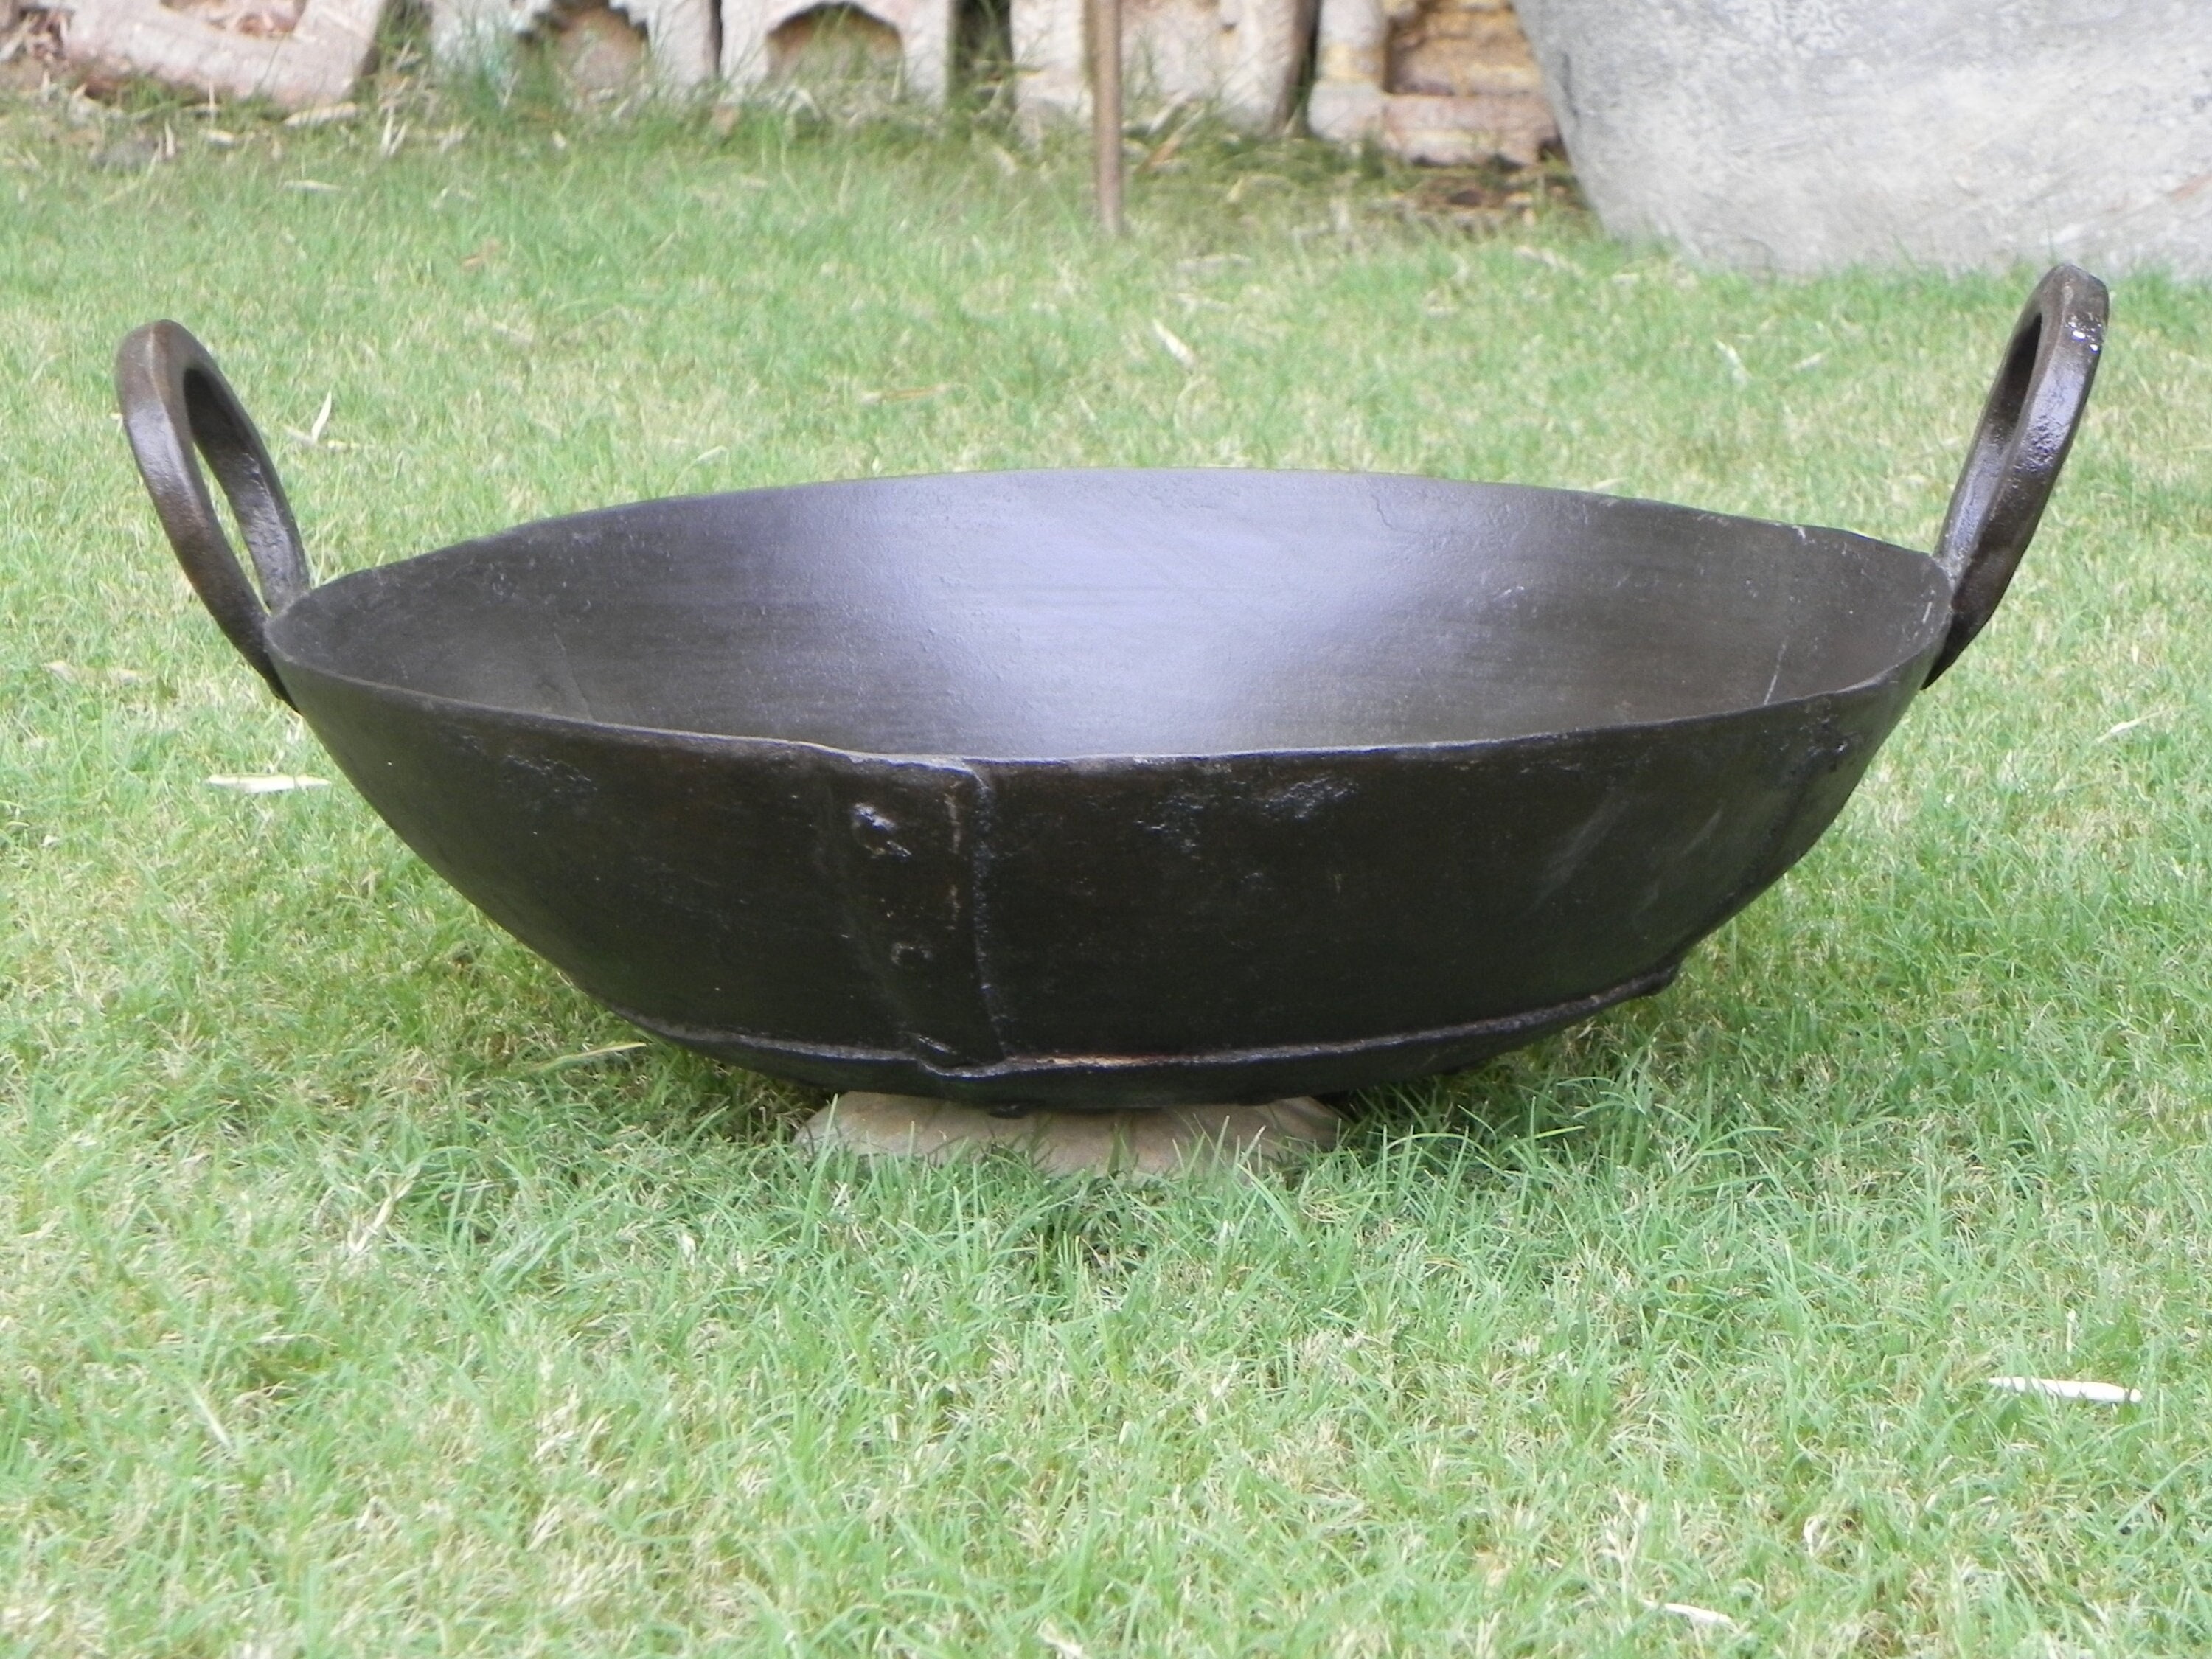 Traditional Cast Iron Kadai for Cooking (8 to 12 Inches) – Santhi